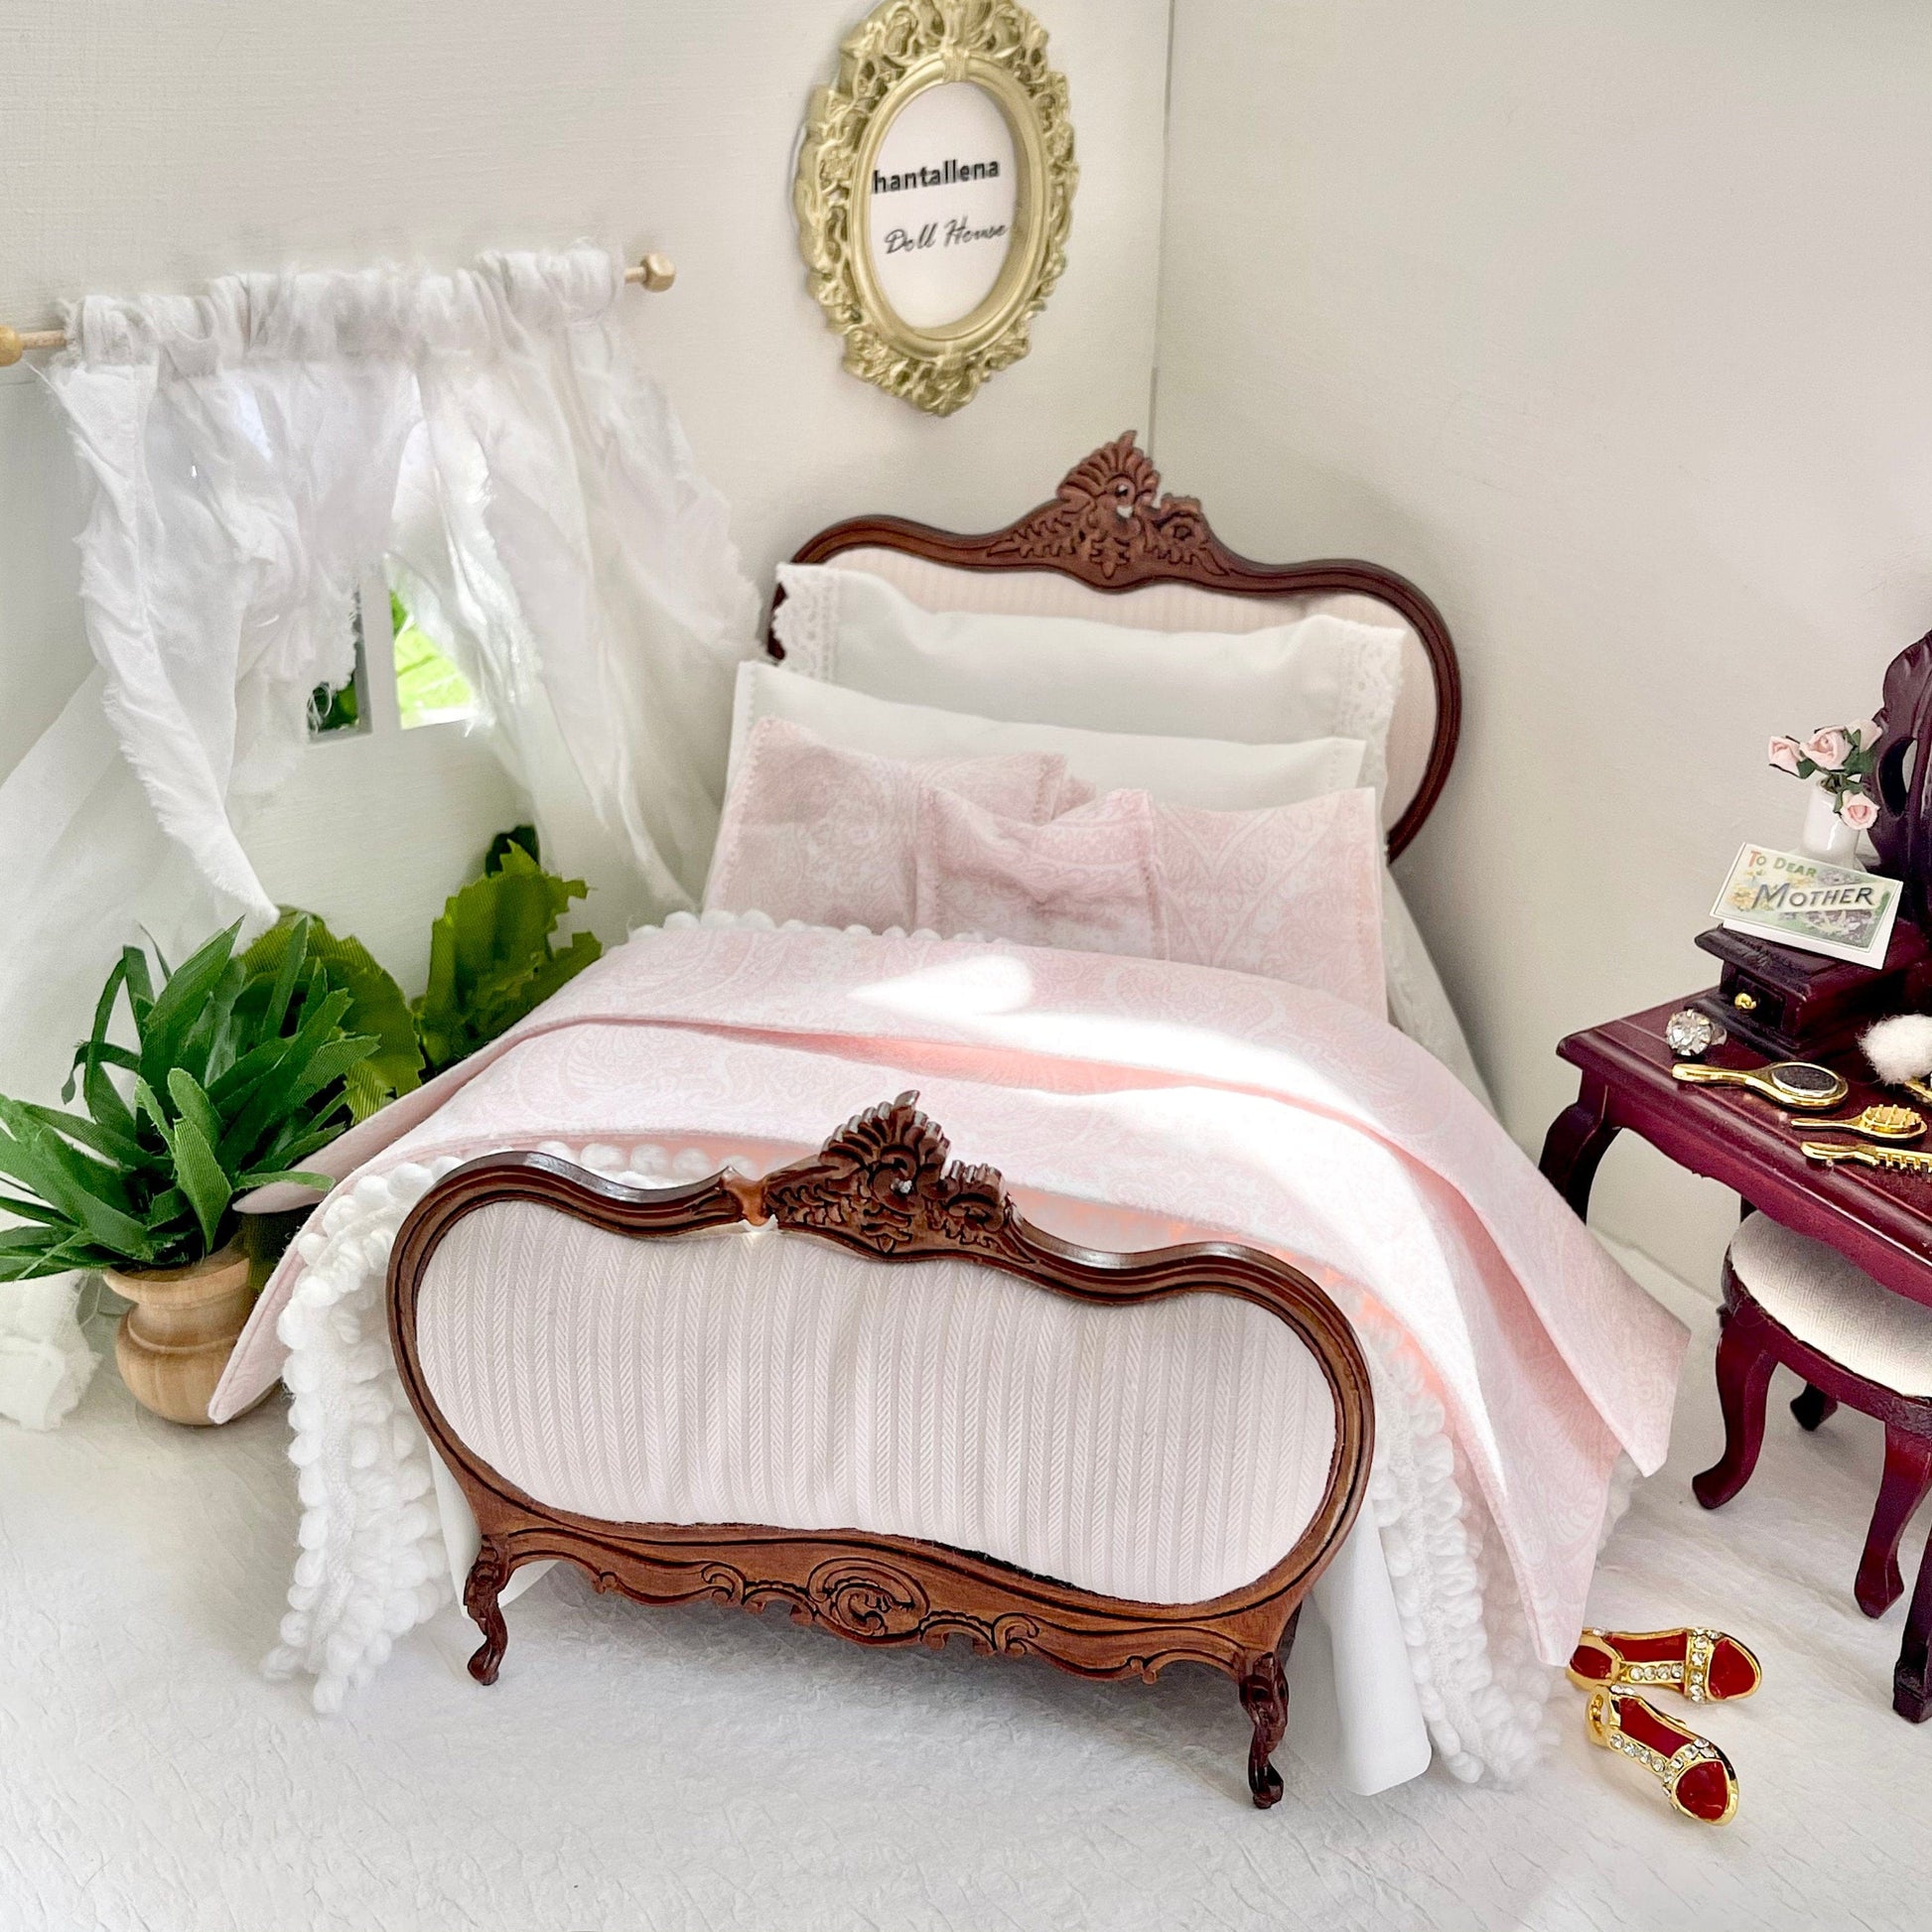 Chantallena Doll House double Shabby Cottage -  Eight Piece Shabby White Cotton Bedding Set with Pink Scroll Bed Runner